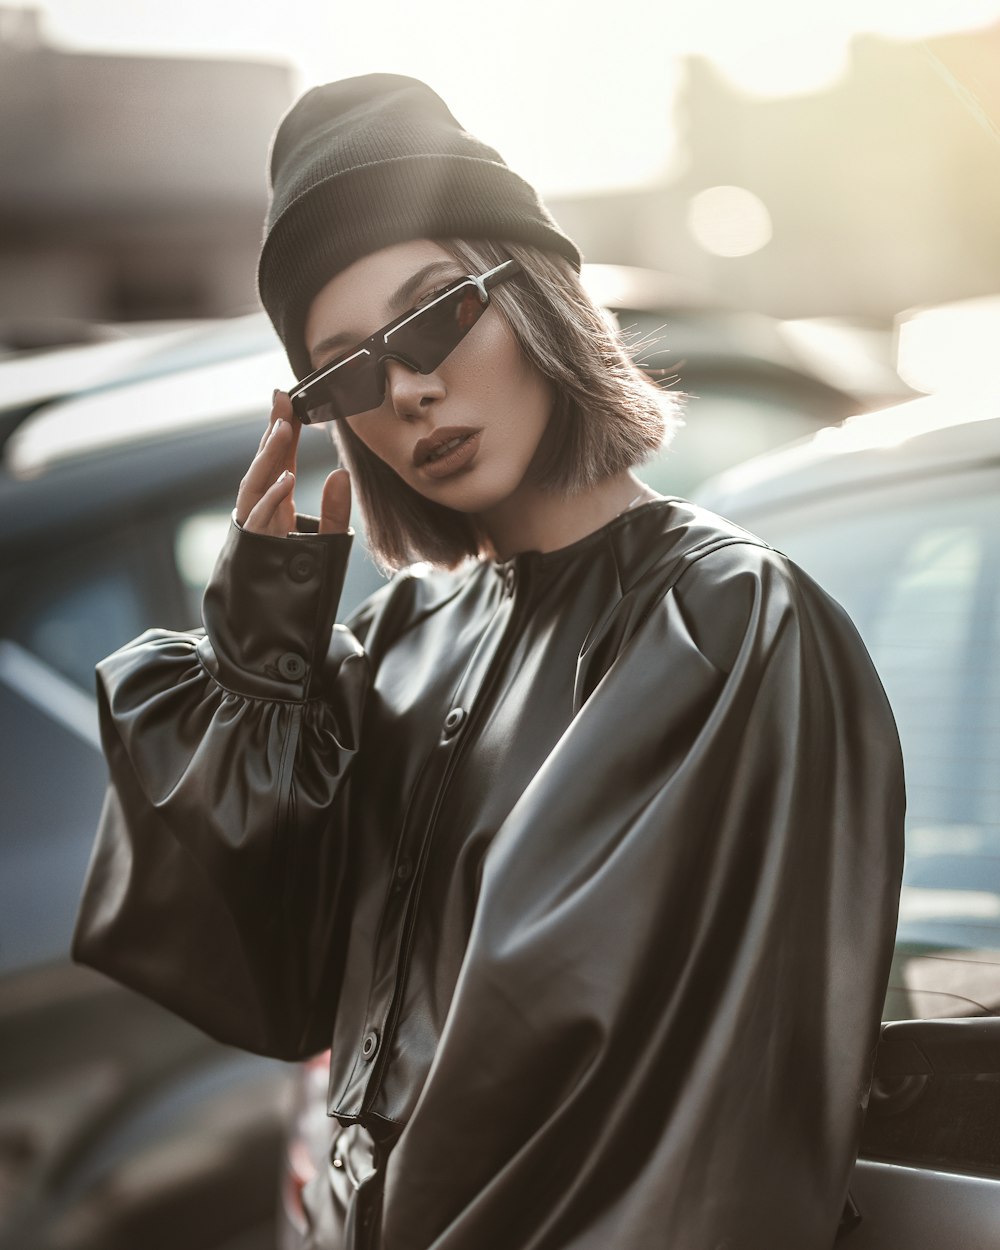 woman wearing black long-sleeved blouse and sunglasses standing near vehicle